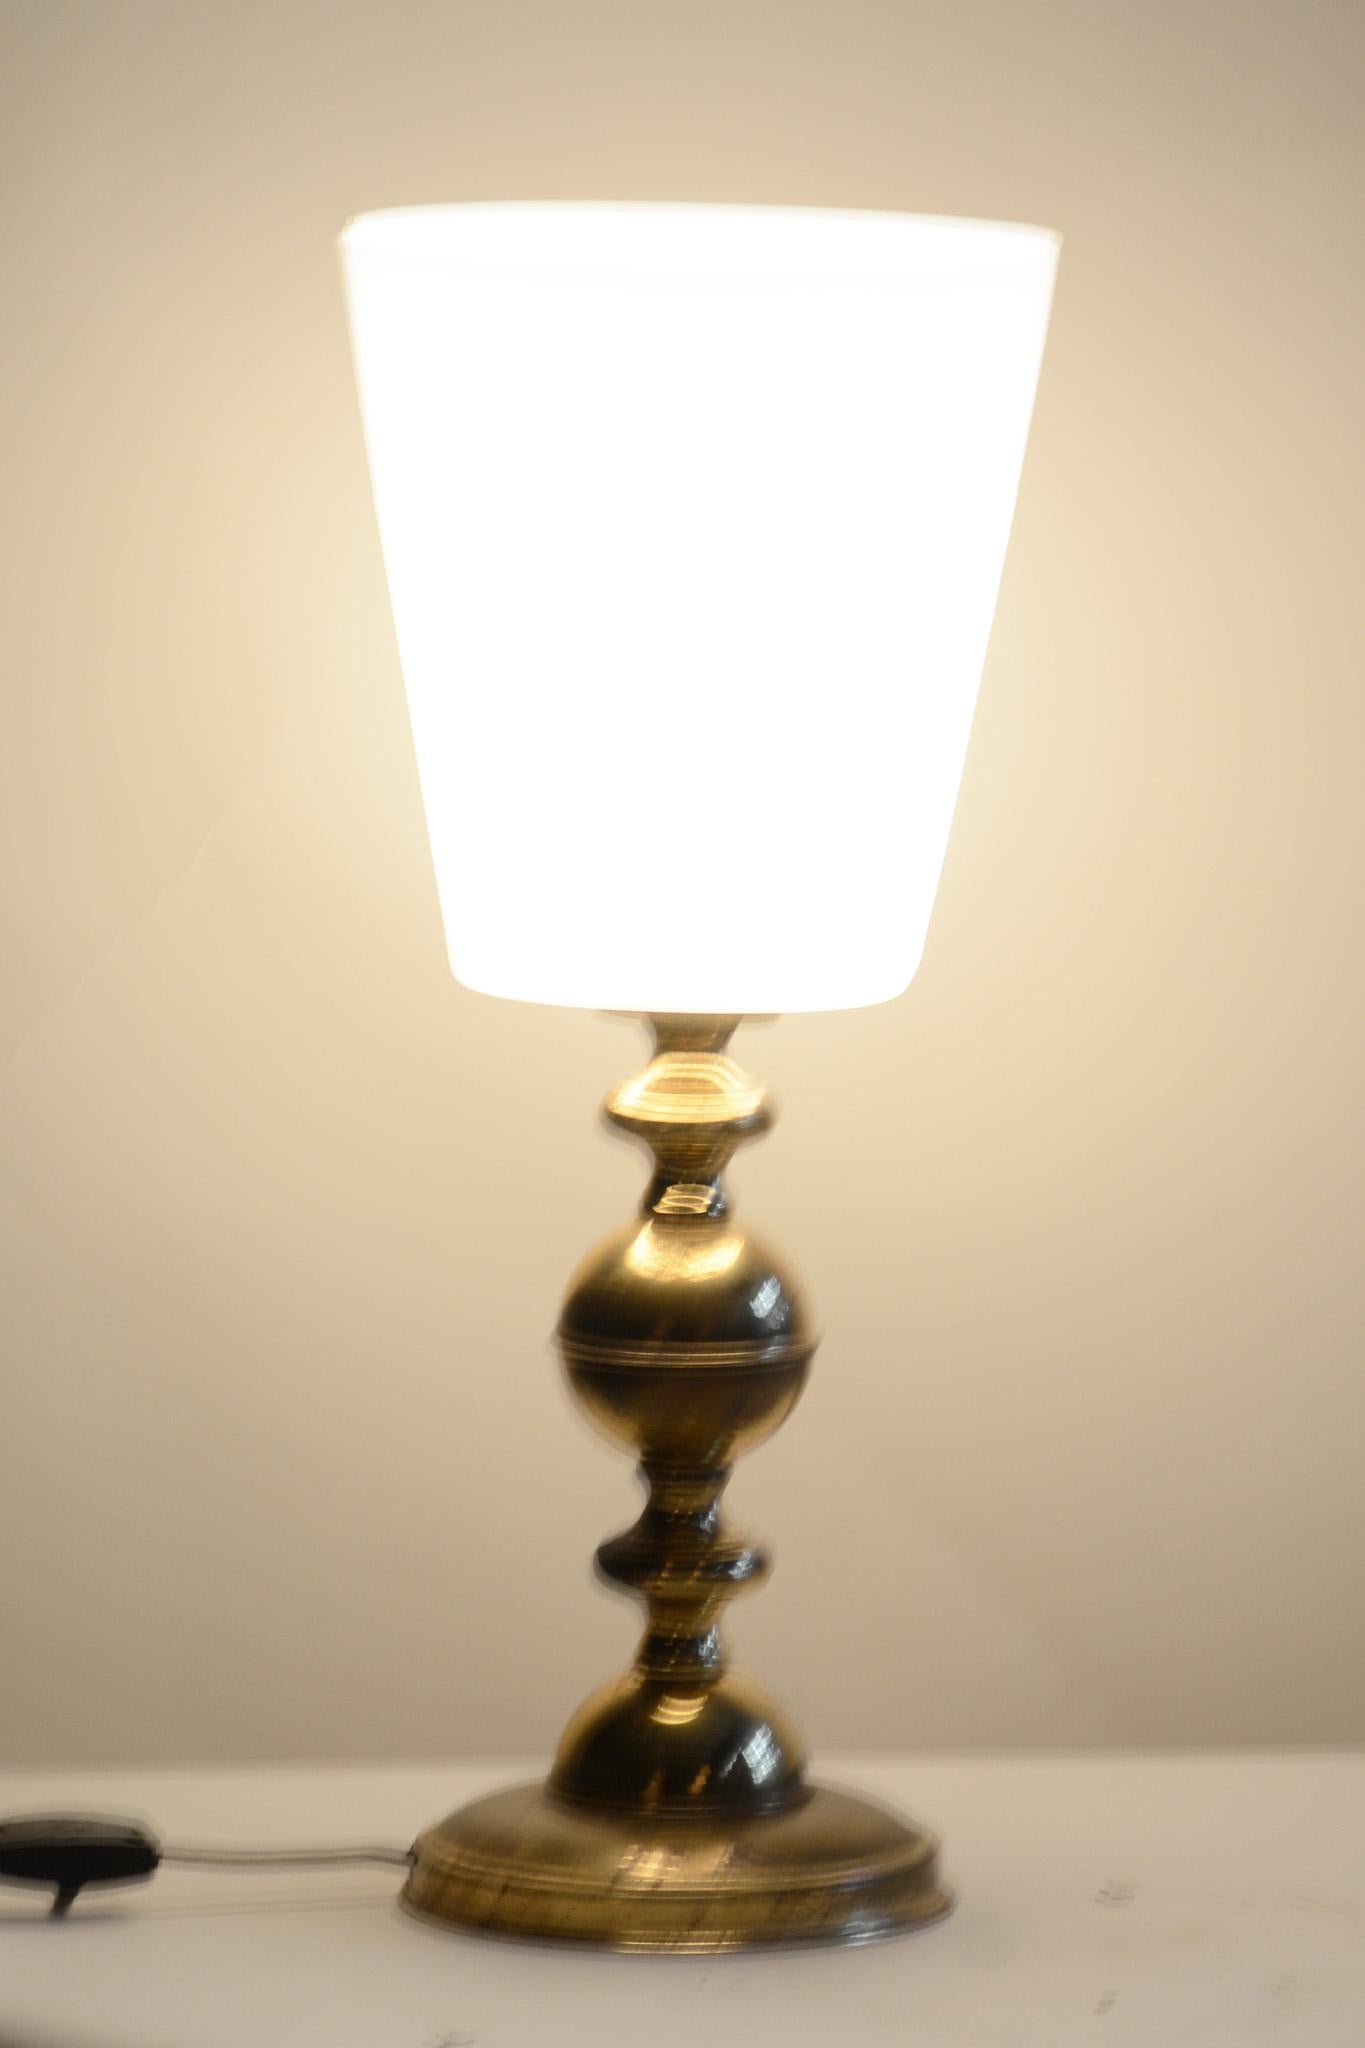 midcentury Table Lamp.

Period: 1960-1969
Source: Czechia 
Material: Milk Glass, Brass

Undamaged and fully functional.

This item features Classic Mid-Century Modern (MCM) design elements. Elements of MCM interior design include clean